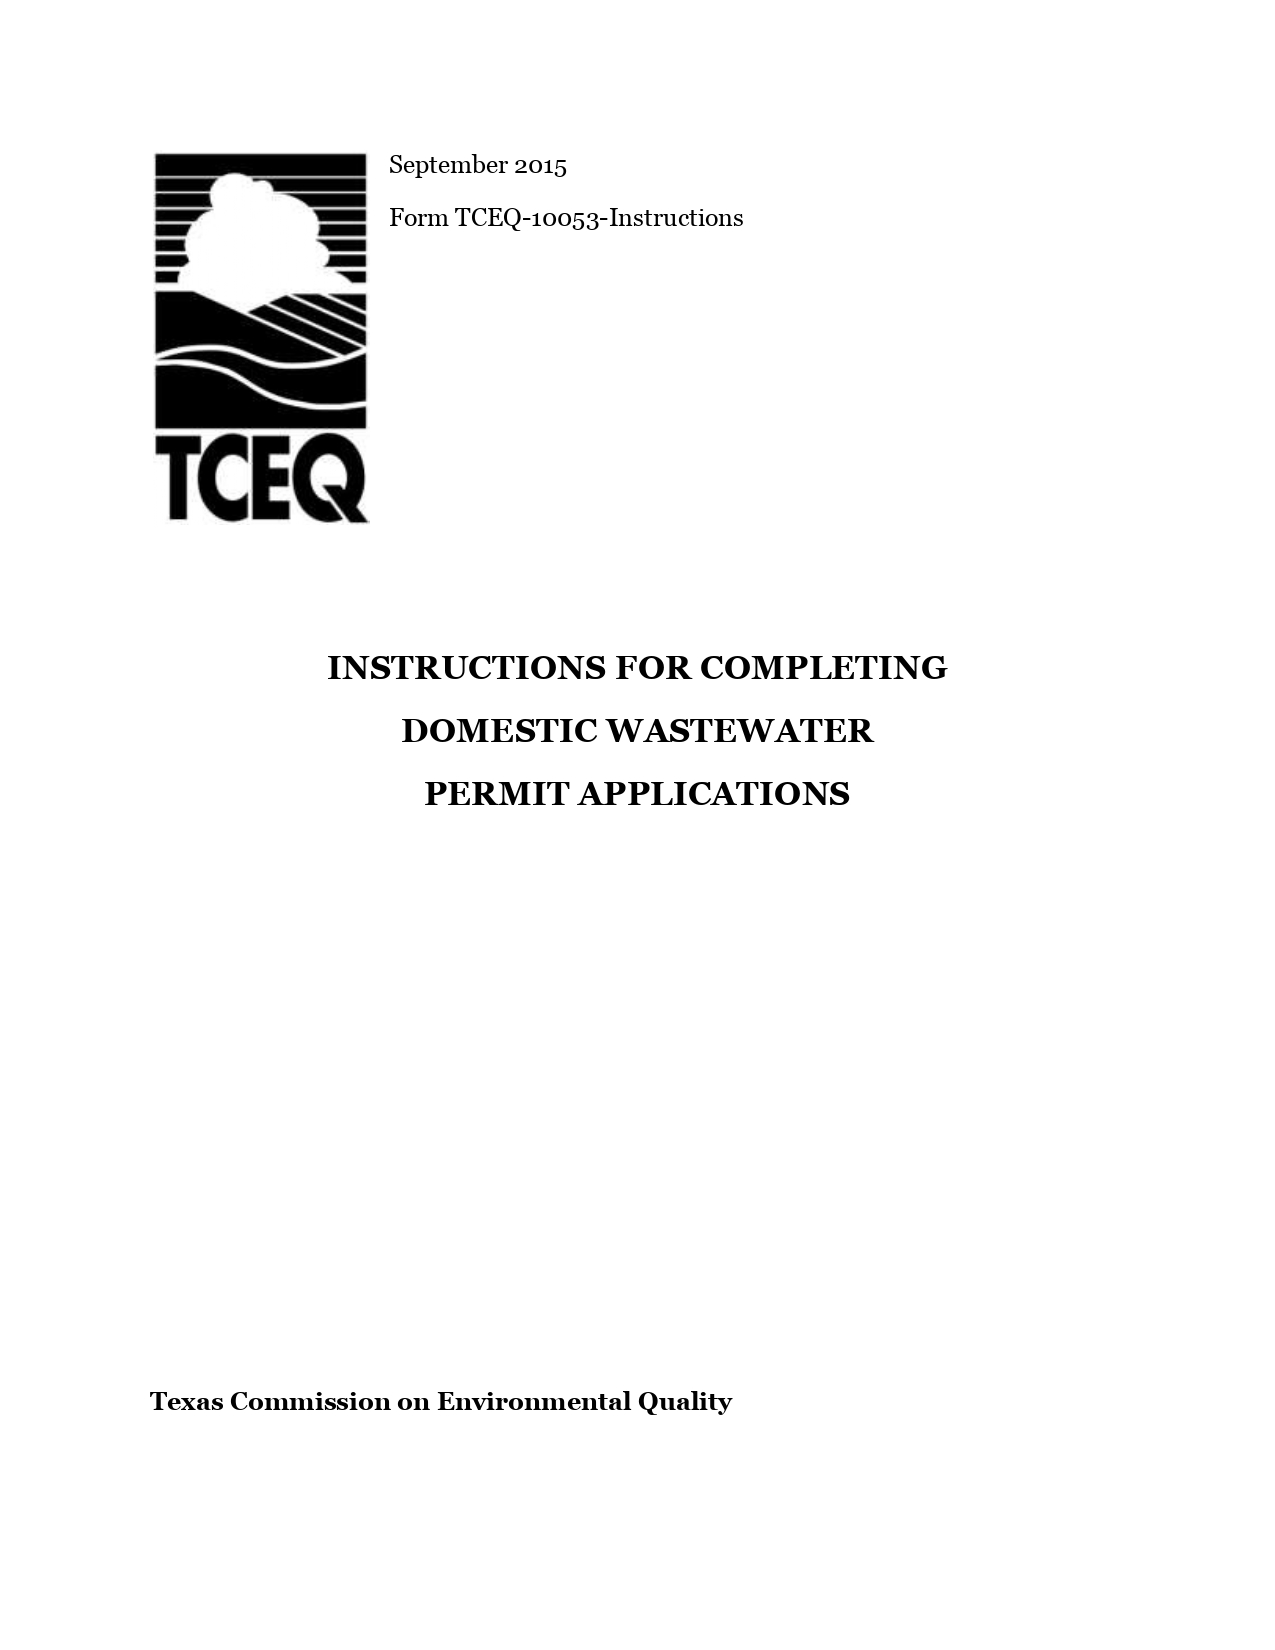 instructions-for-completing-domestic-wastewater-permit-applications